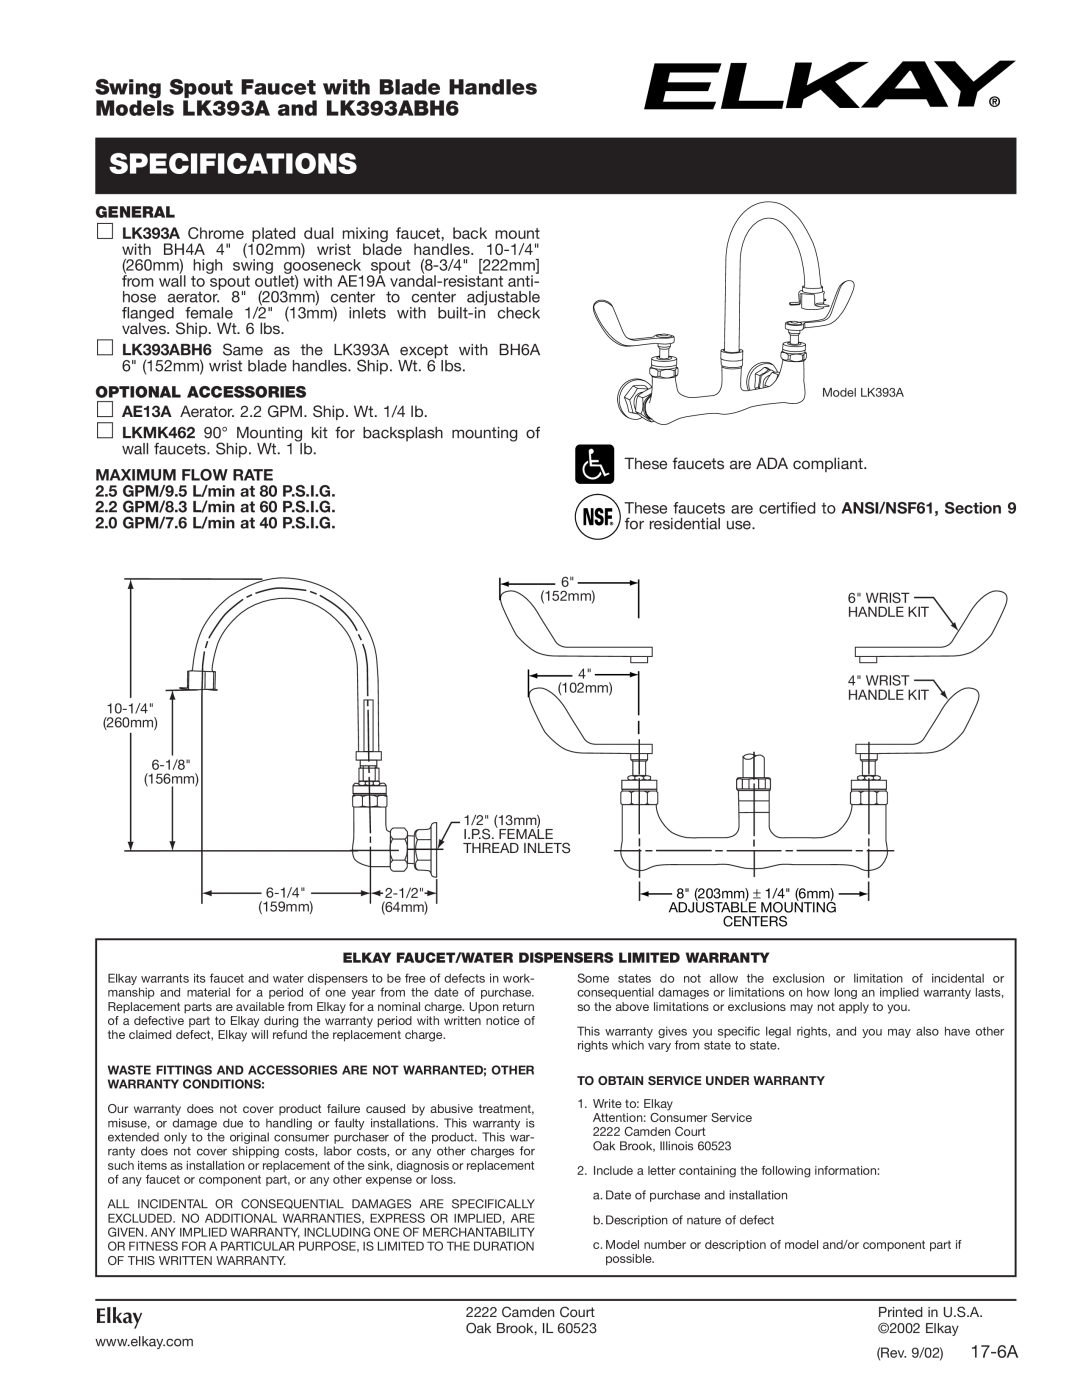 Elkay specifications Specifications, Swing Spout Faucet with Blade Handles, Models LK393A and LK393ABH6, Elkay, 17-6A 